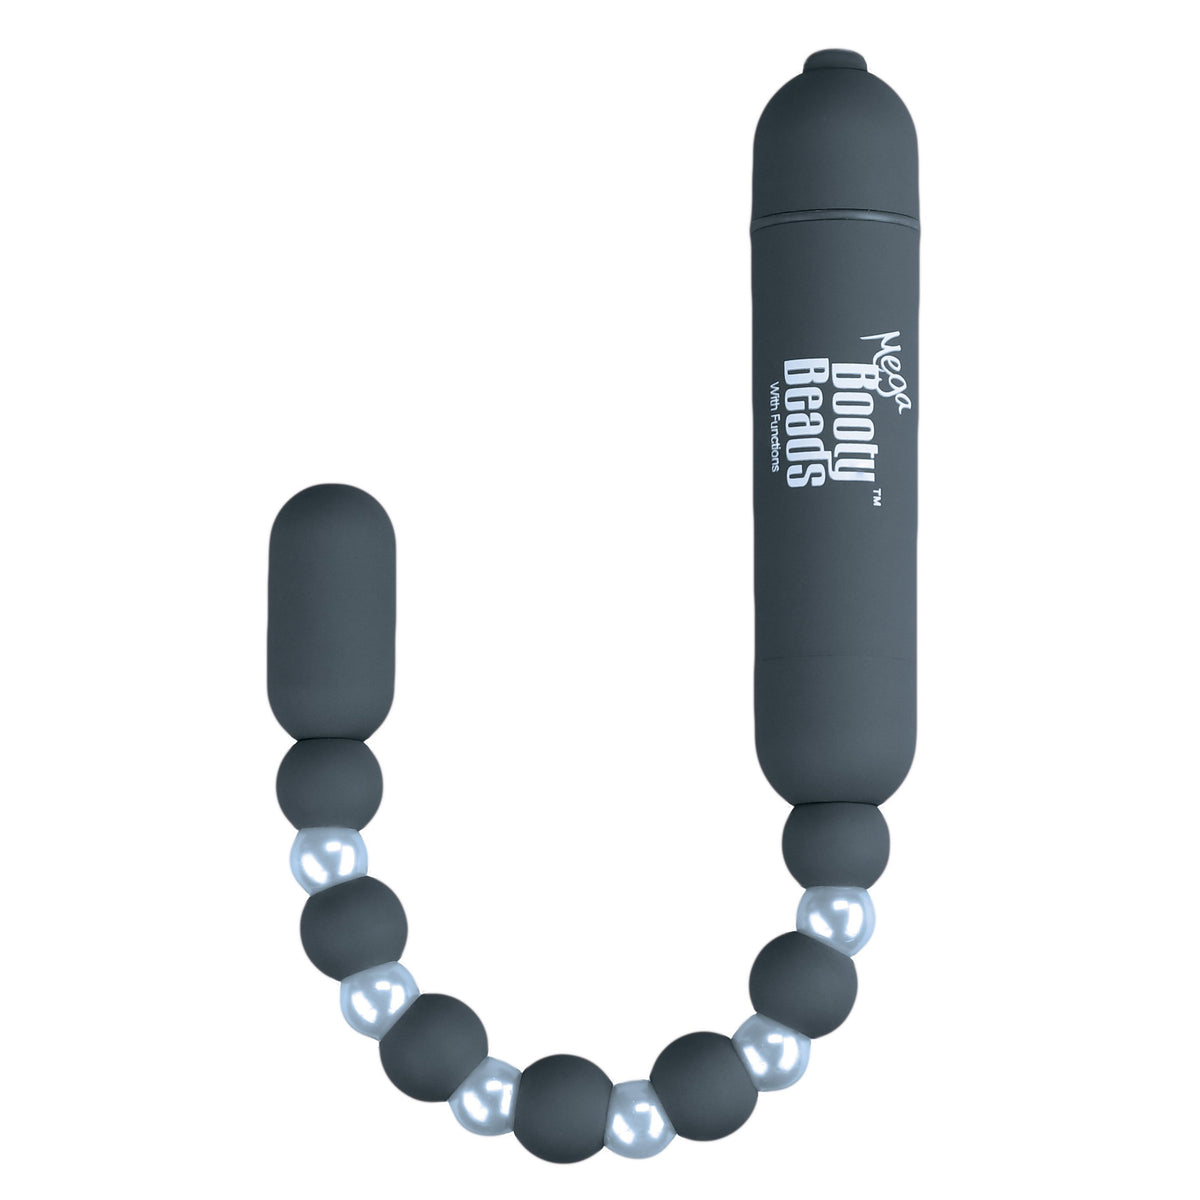 Power Bullet Mega Booty Beads with 7 Functions - Grey - Thorn & Feather